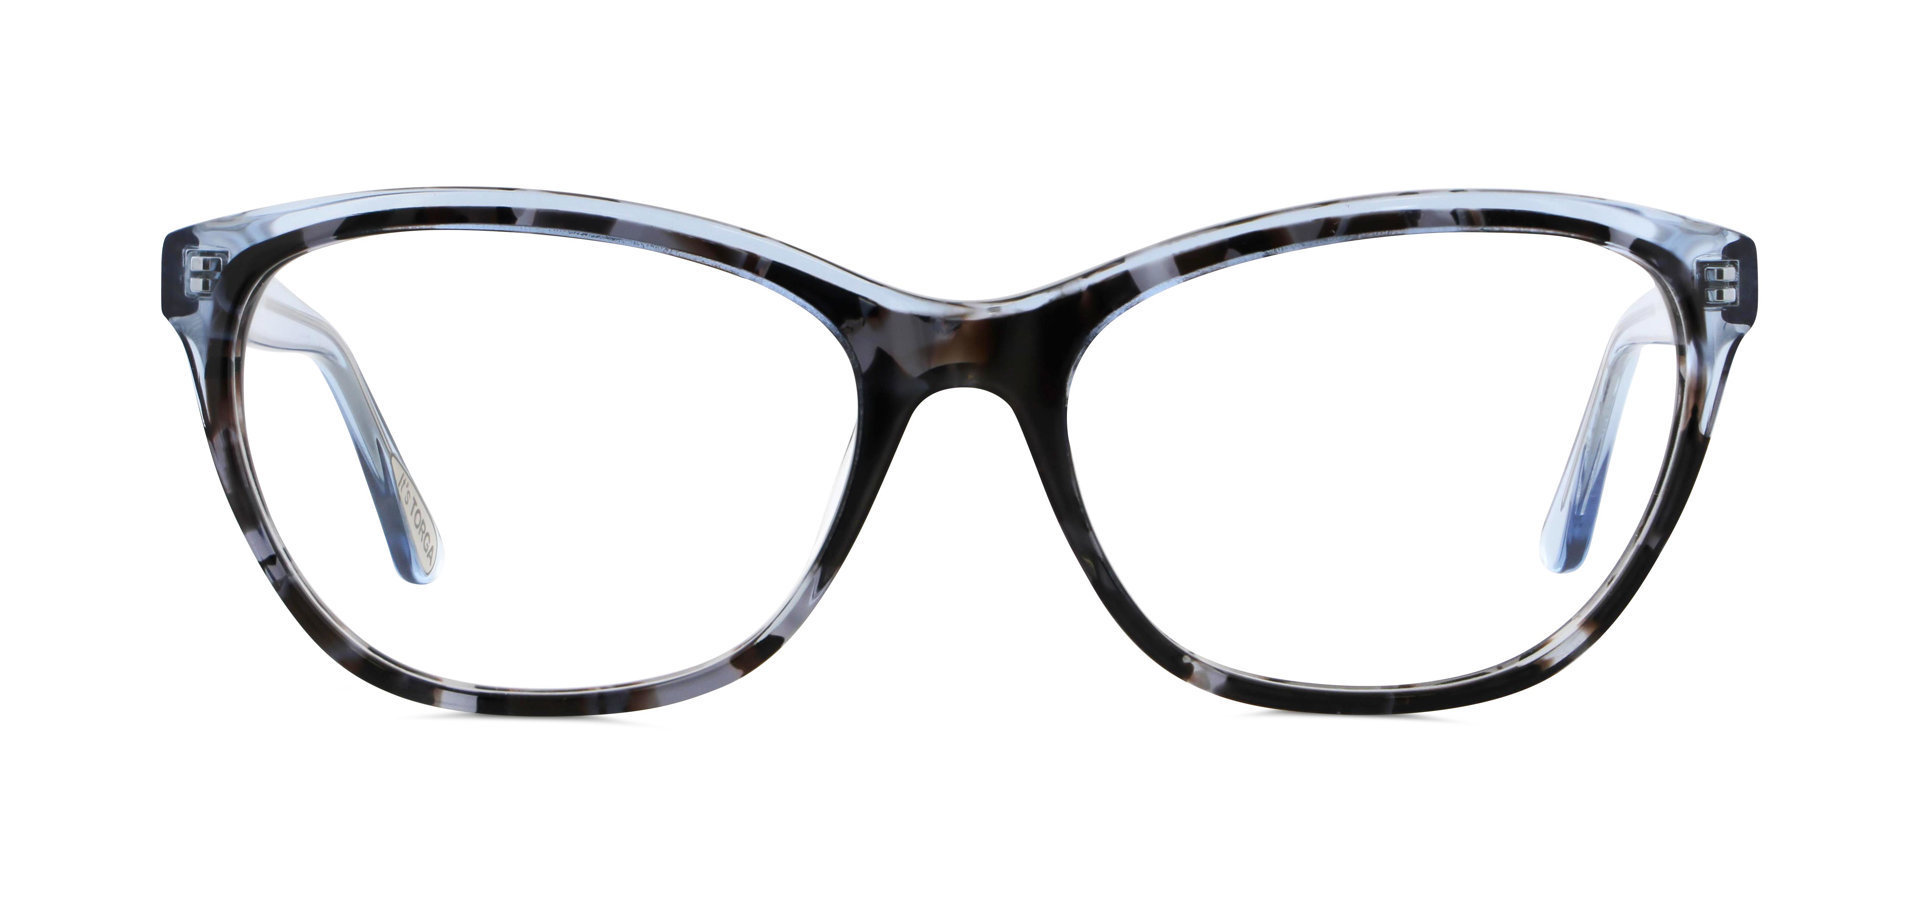 Bella 7063 - Torga Optical - Optometrists, Spectacle Spectacle Deals ...